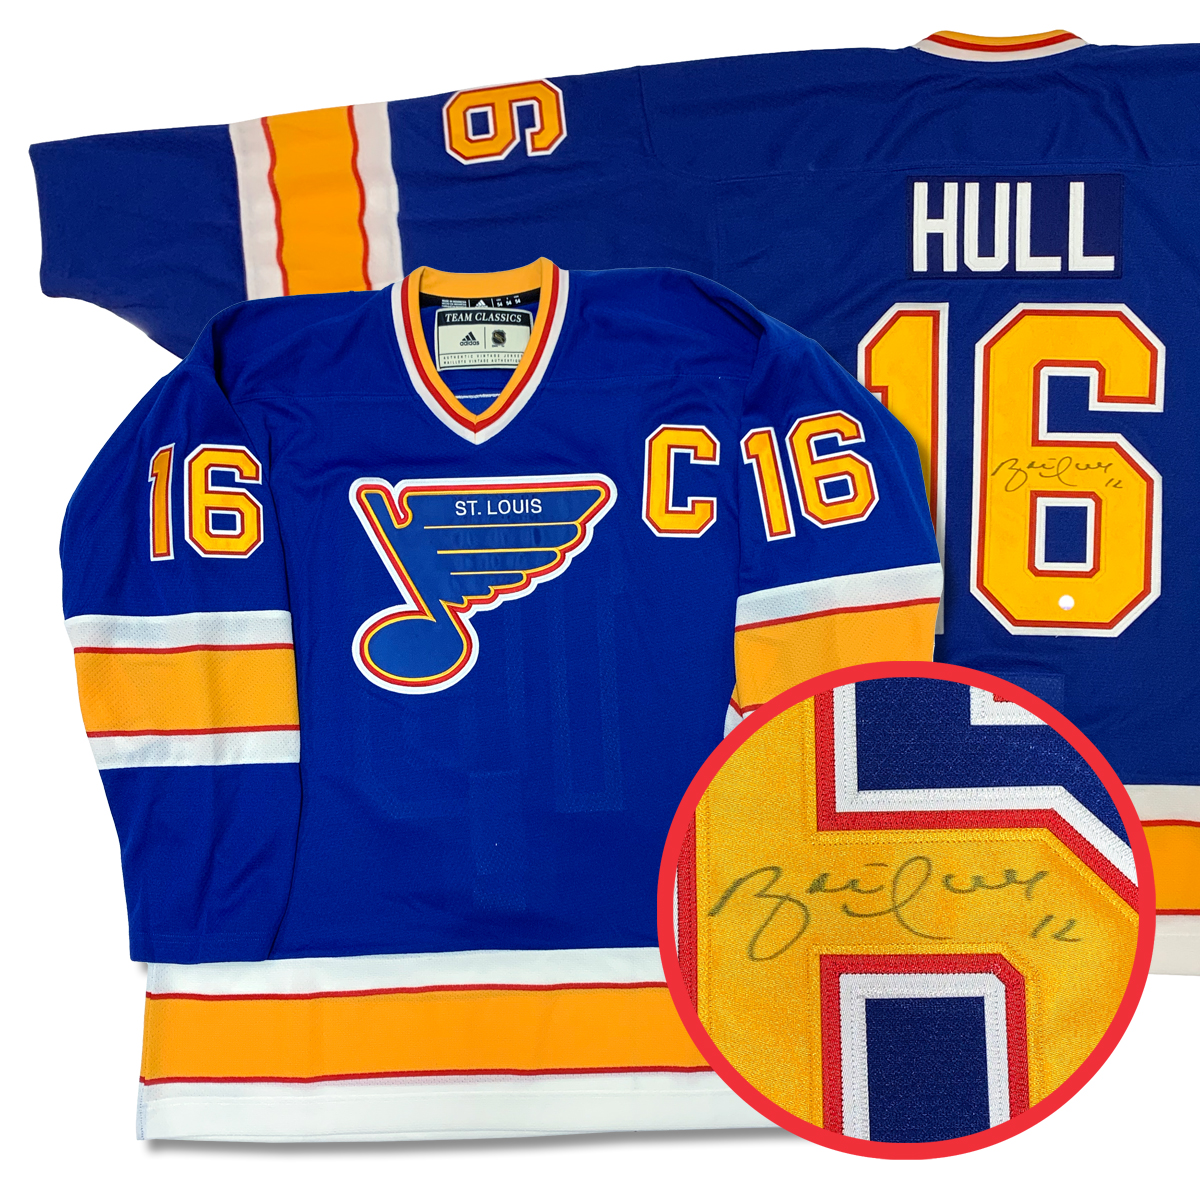 download hull st louis blues